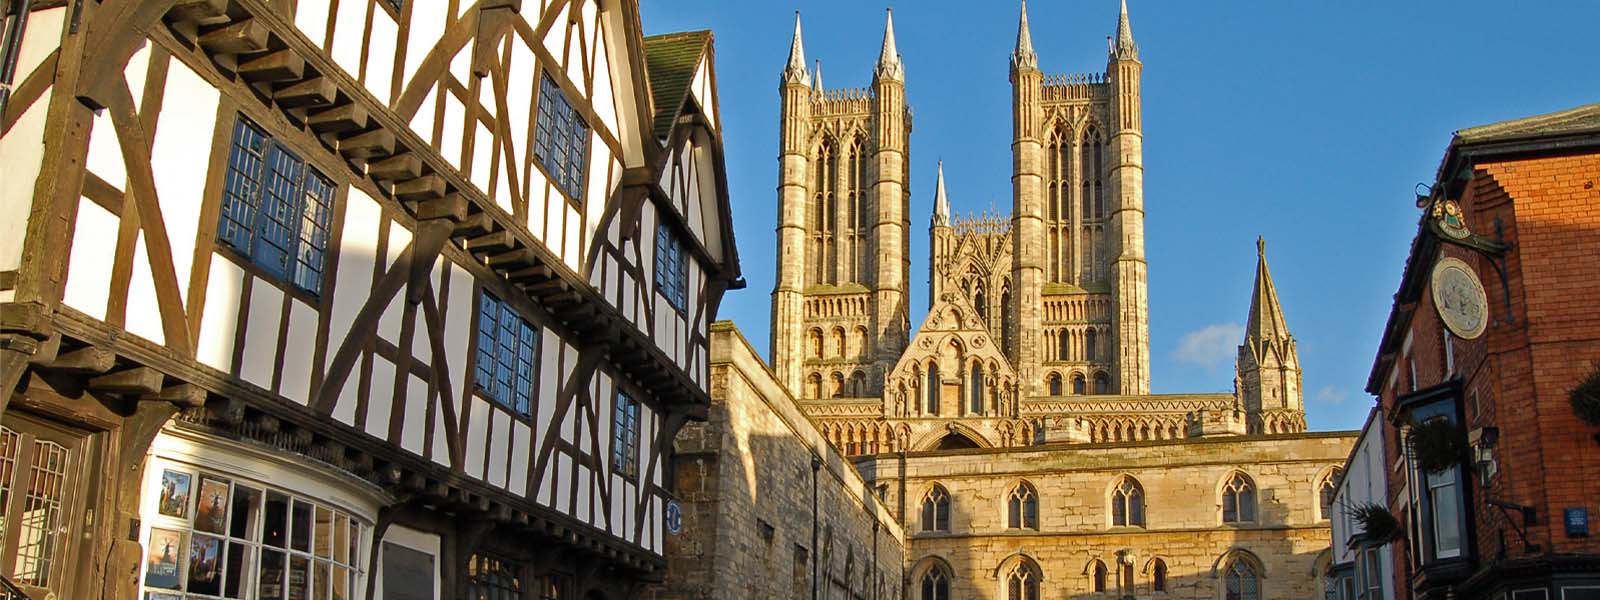 Lincoln Cathedral and surrounding historic buildings